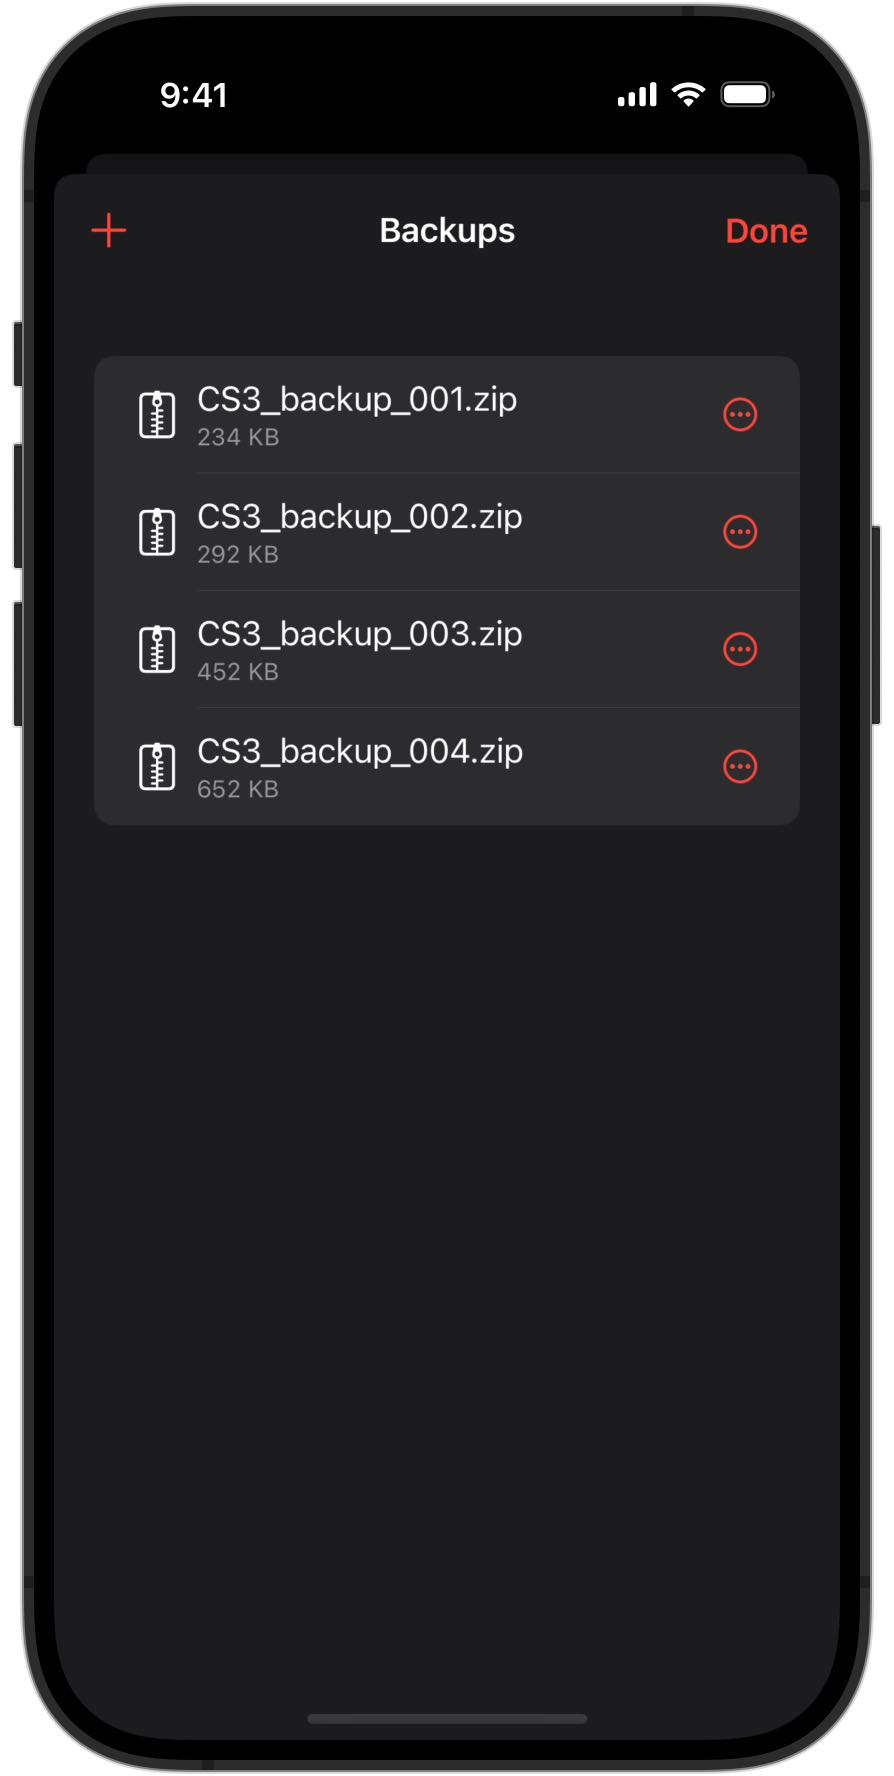 Screenshot of an iPhone showing the backups overview in RailControl Pro